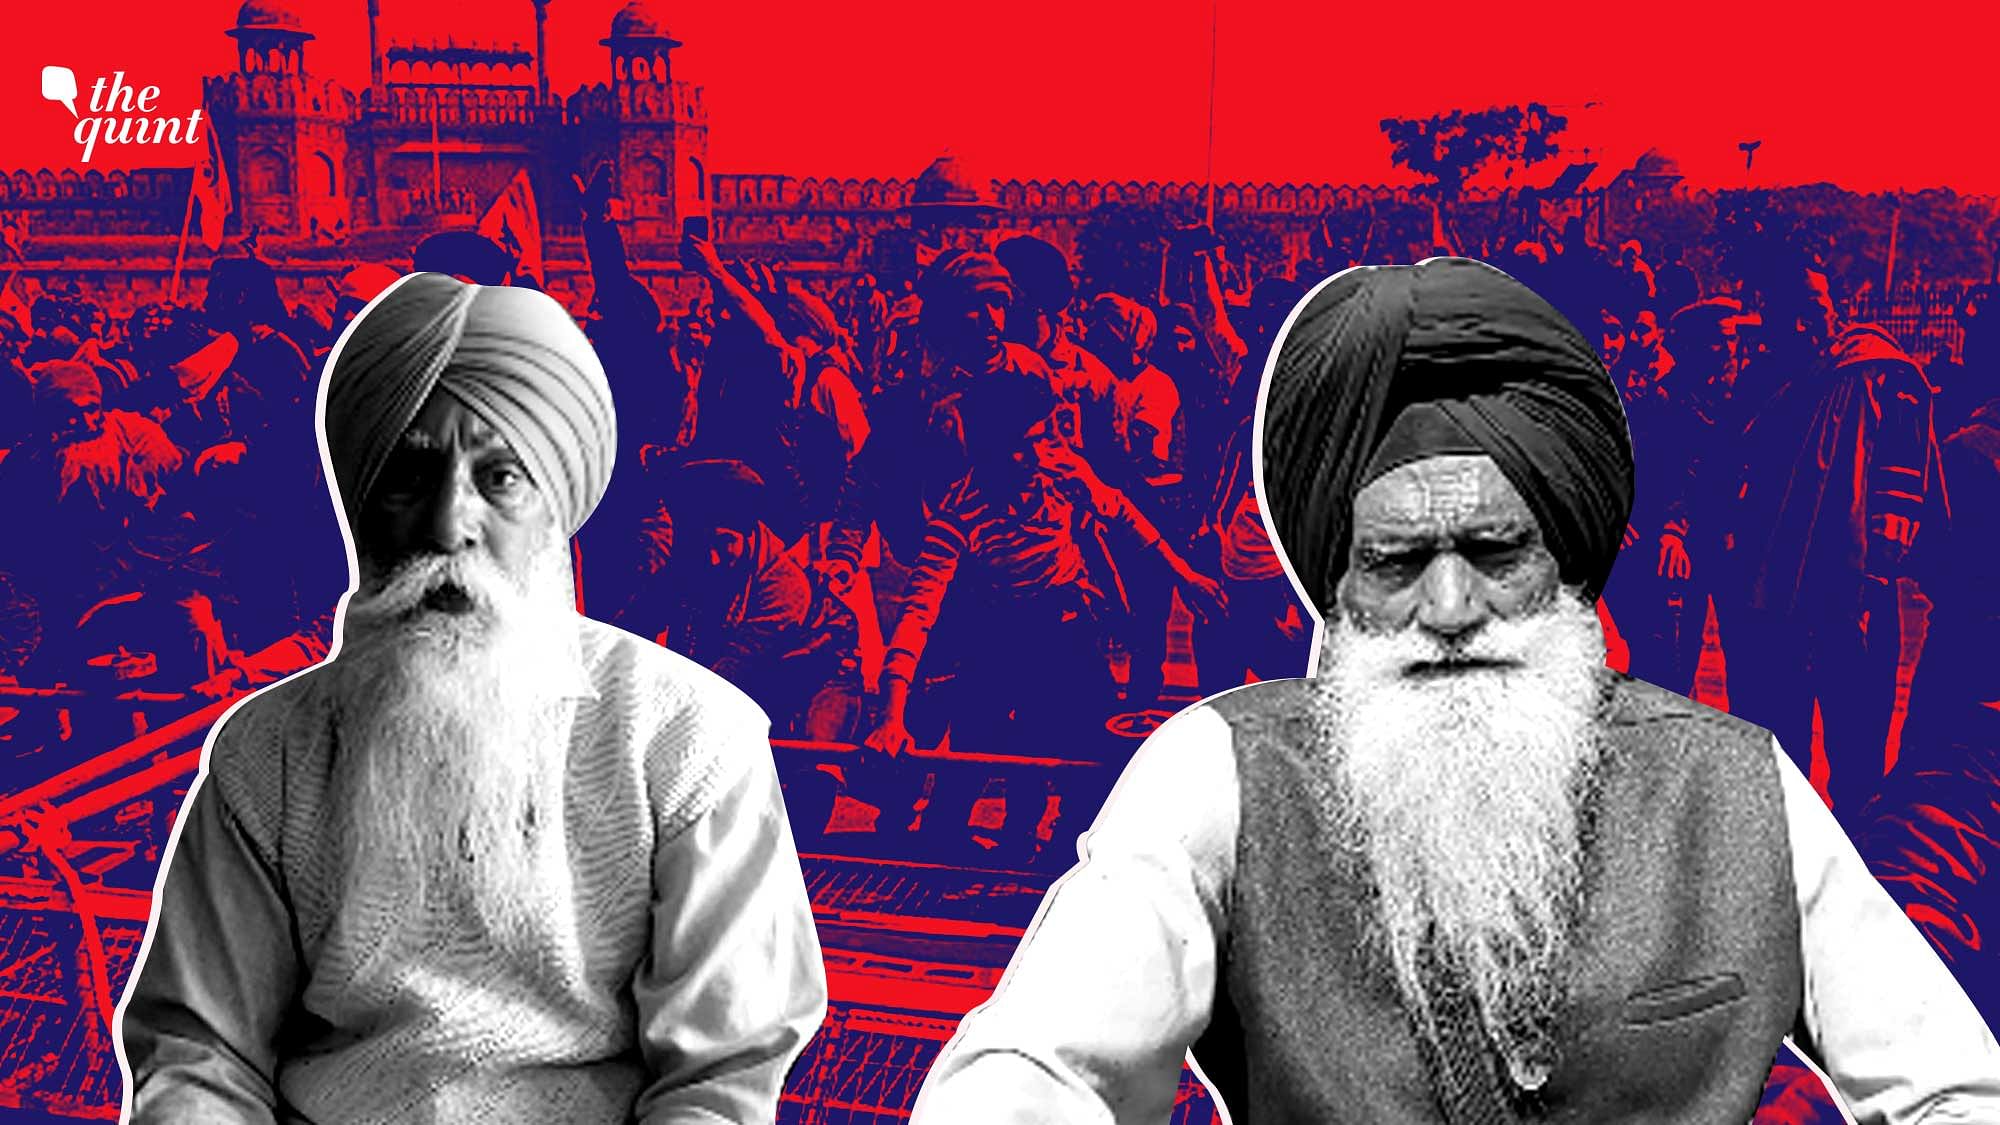  <p>26 January Farmers’ Protest: Two senior citizens, one of them a former Army Subedar, were arrested by Delhi Police for assault. But they told <strong>The Quint</strong> they were protesting peacefully at Delhi's Burari ground that day.</p>